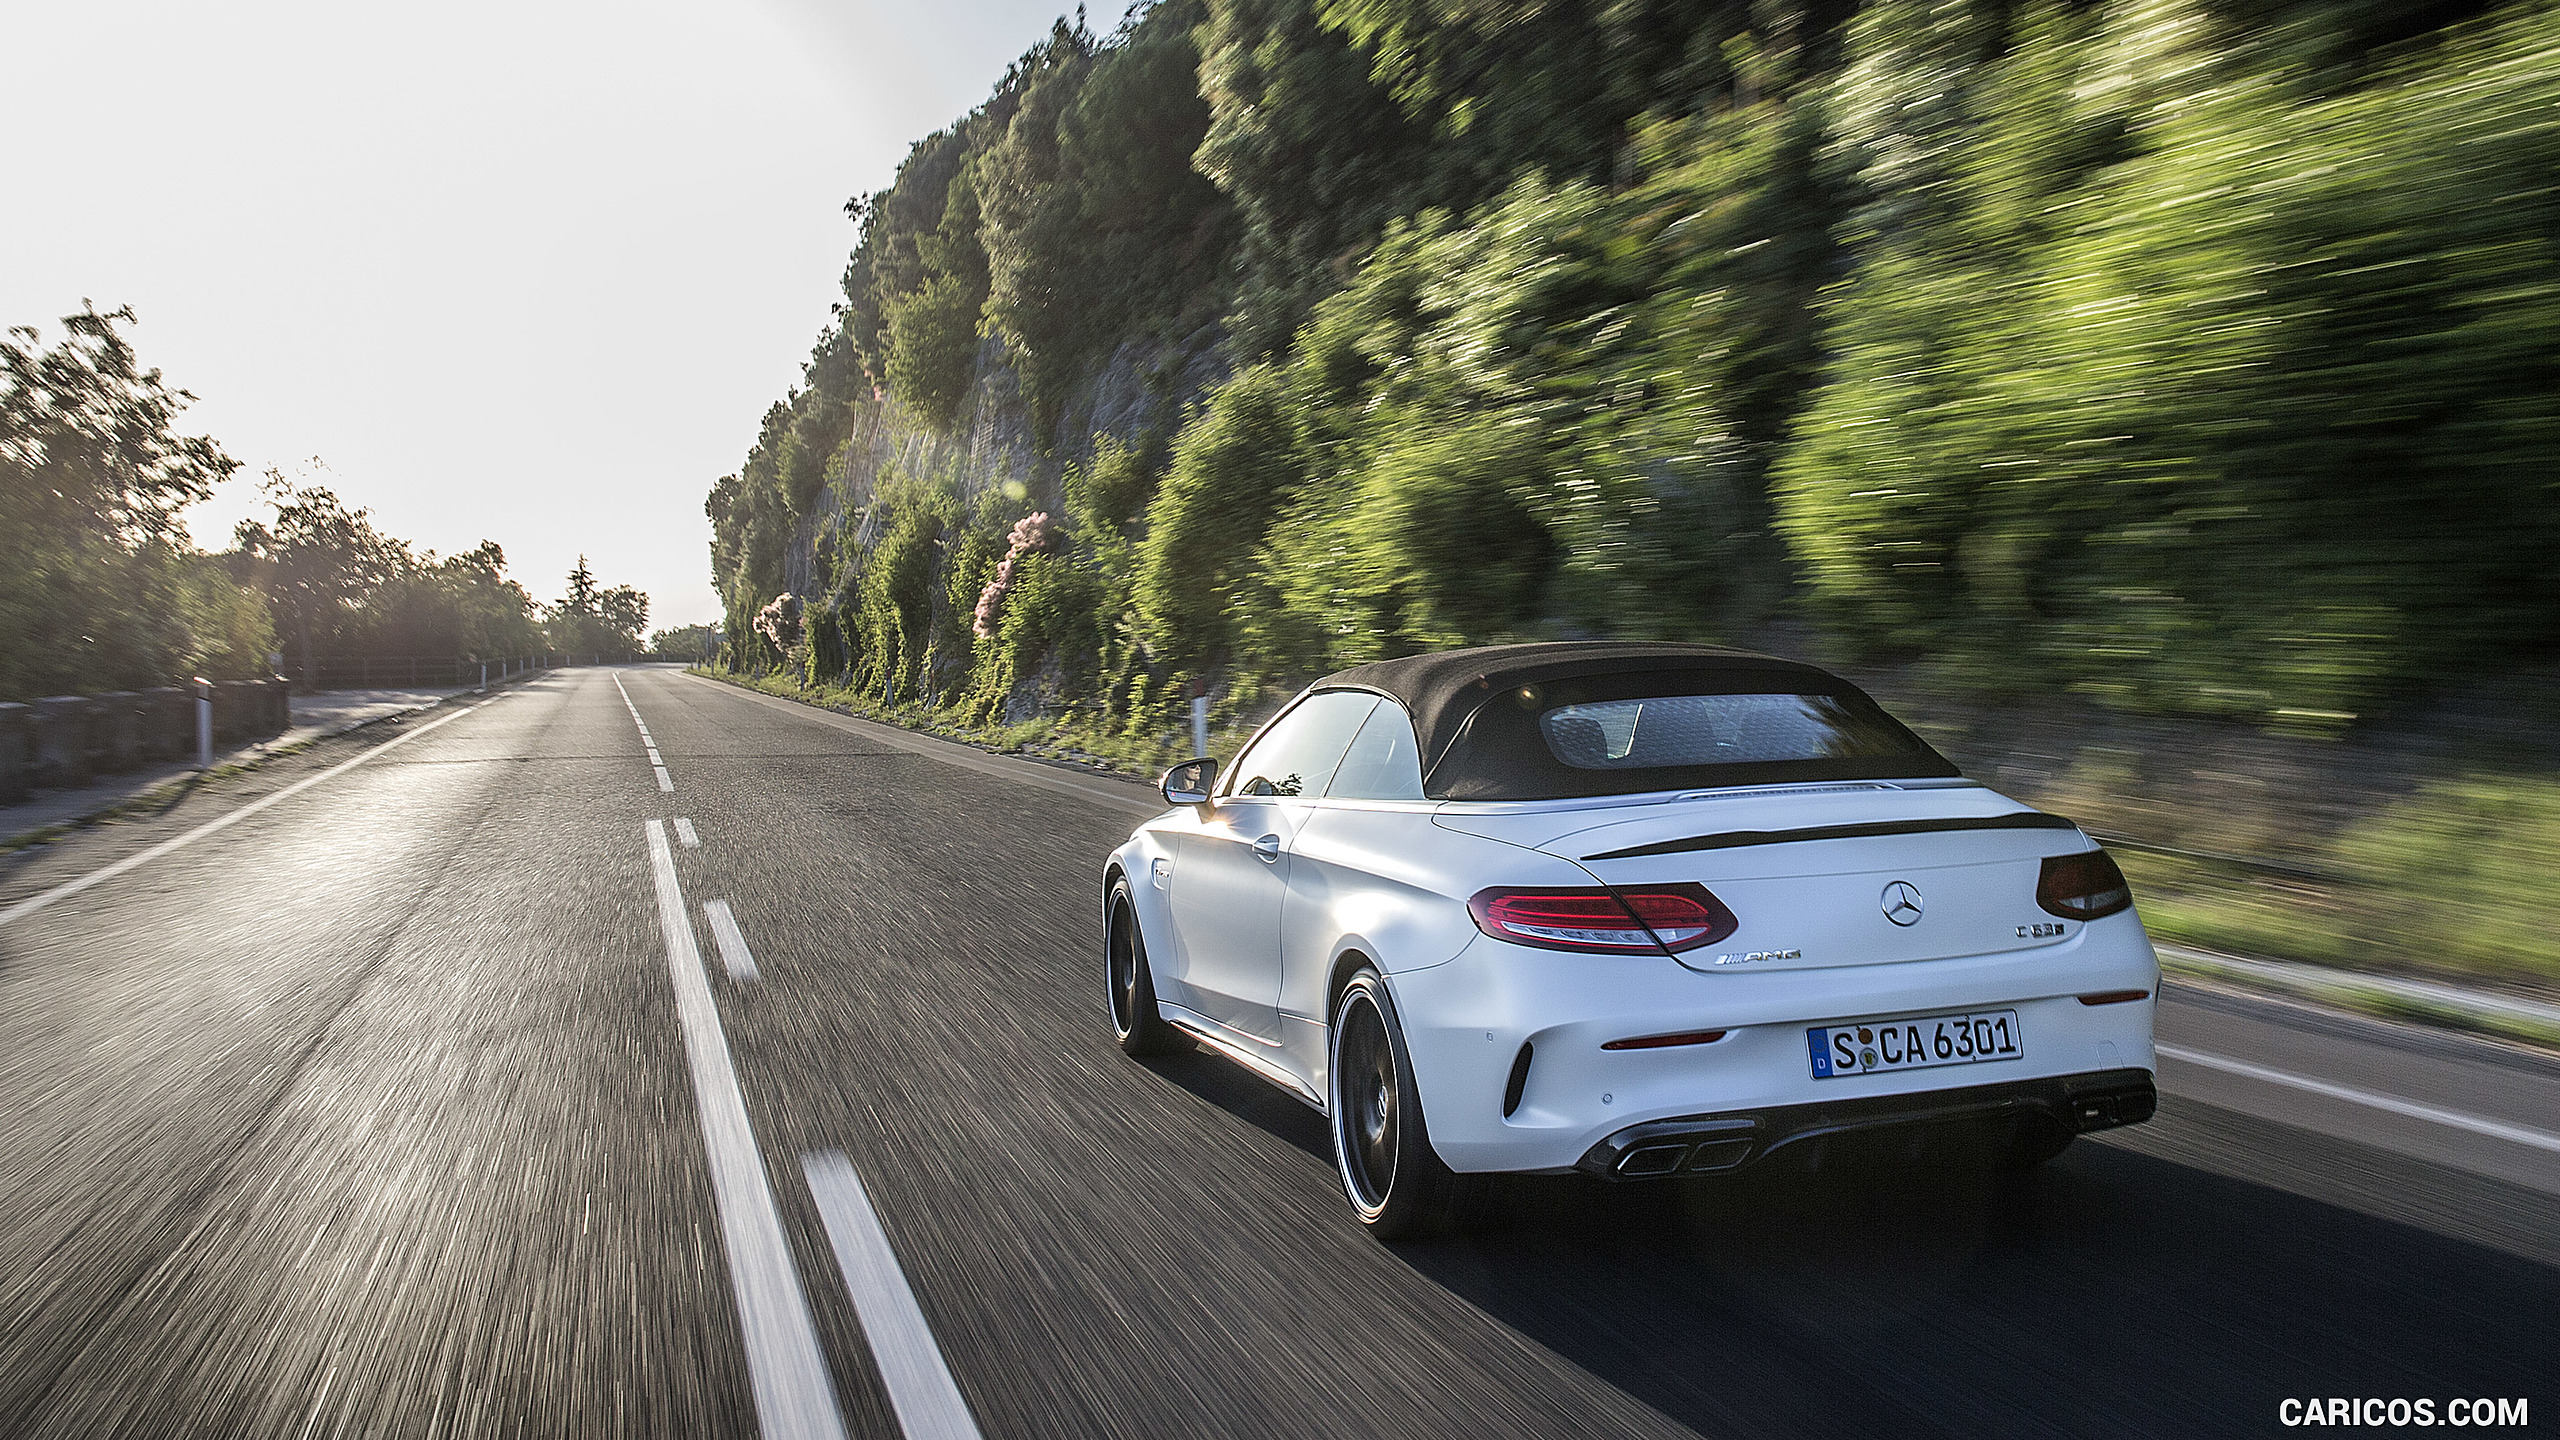 2017 Mercedes-AMG C63 S Cabriolet - Rear, #100 of 222